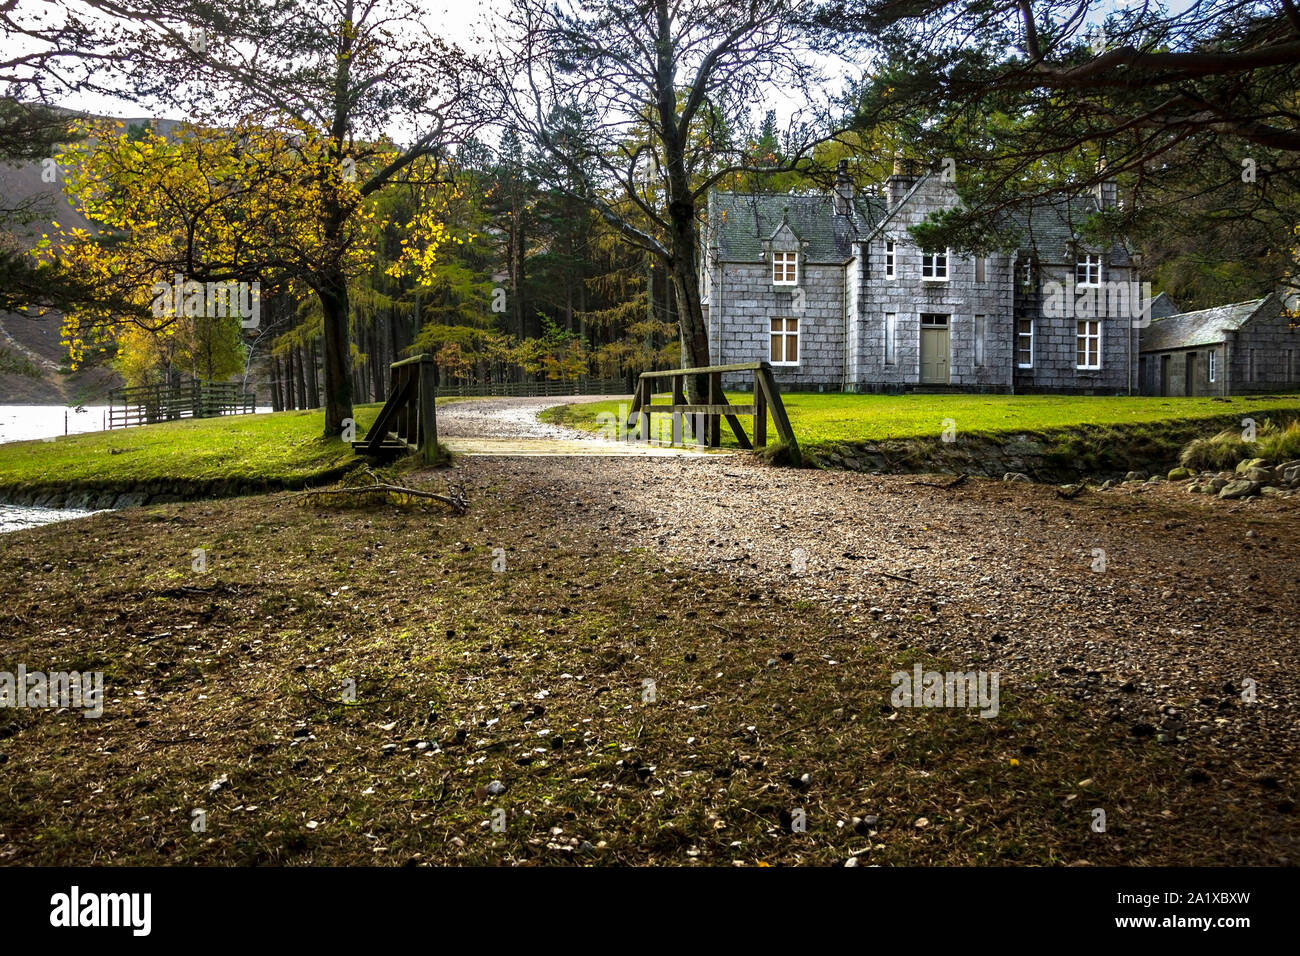 Glas-allt-Shiel - a lodge on the Balmoral Estate by the shore of Loch Muick in Aberdeenshire, Scotland. Stock Photo